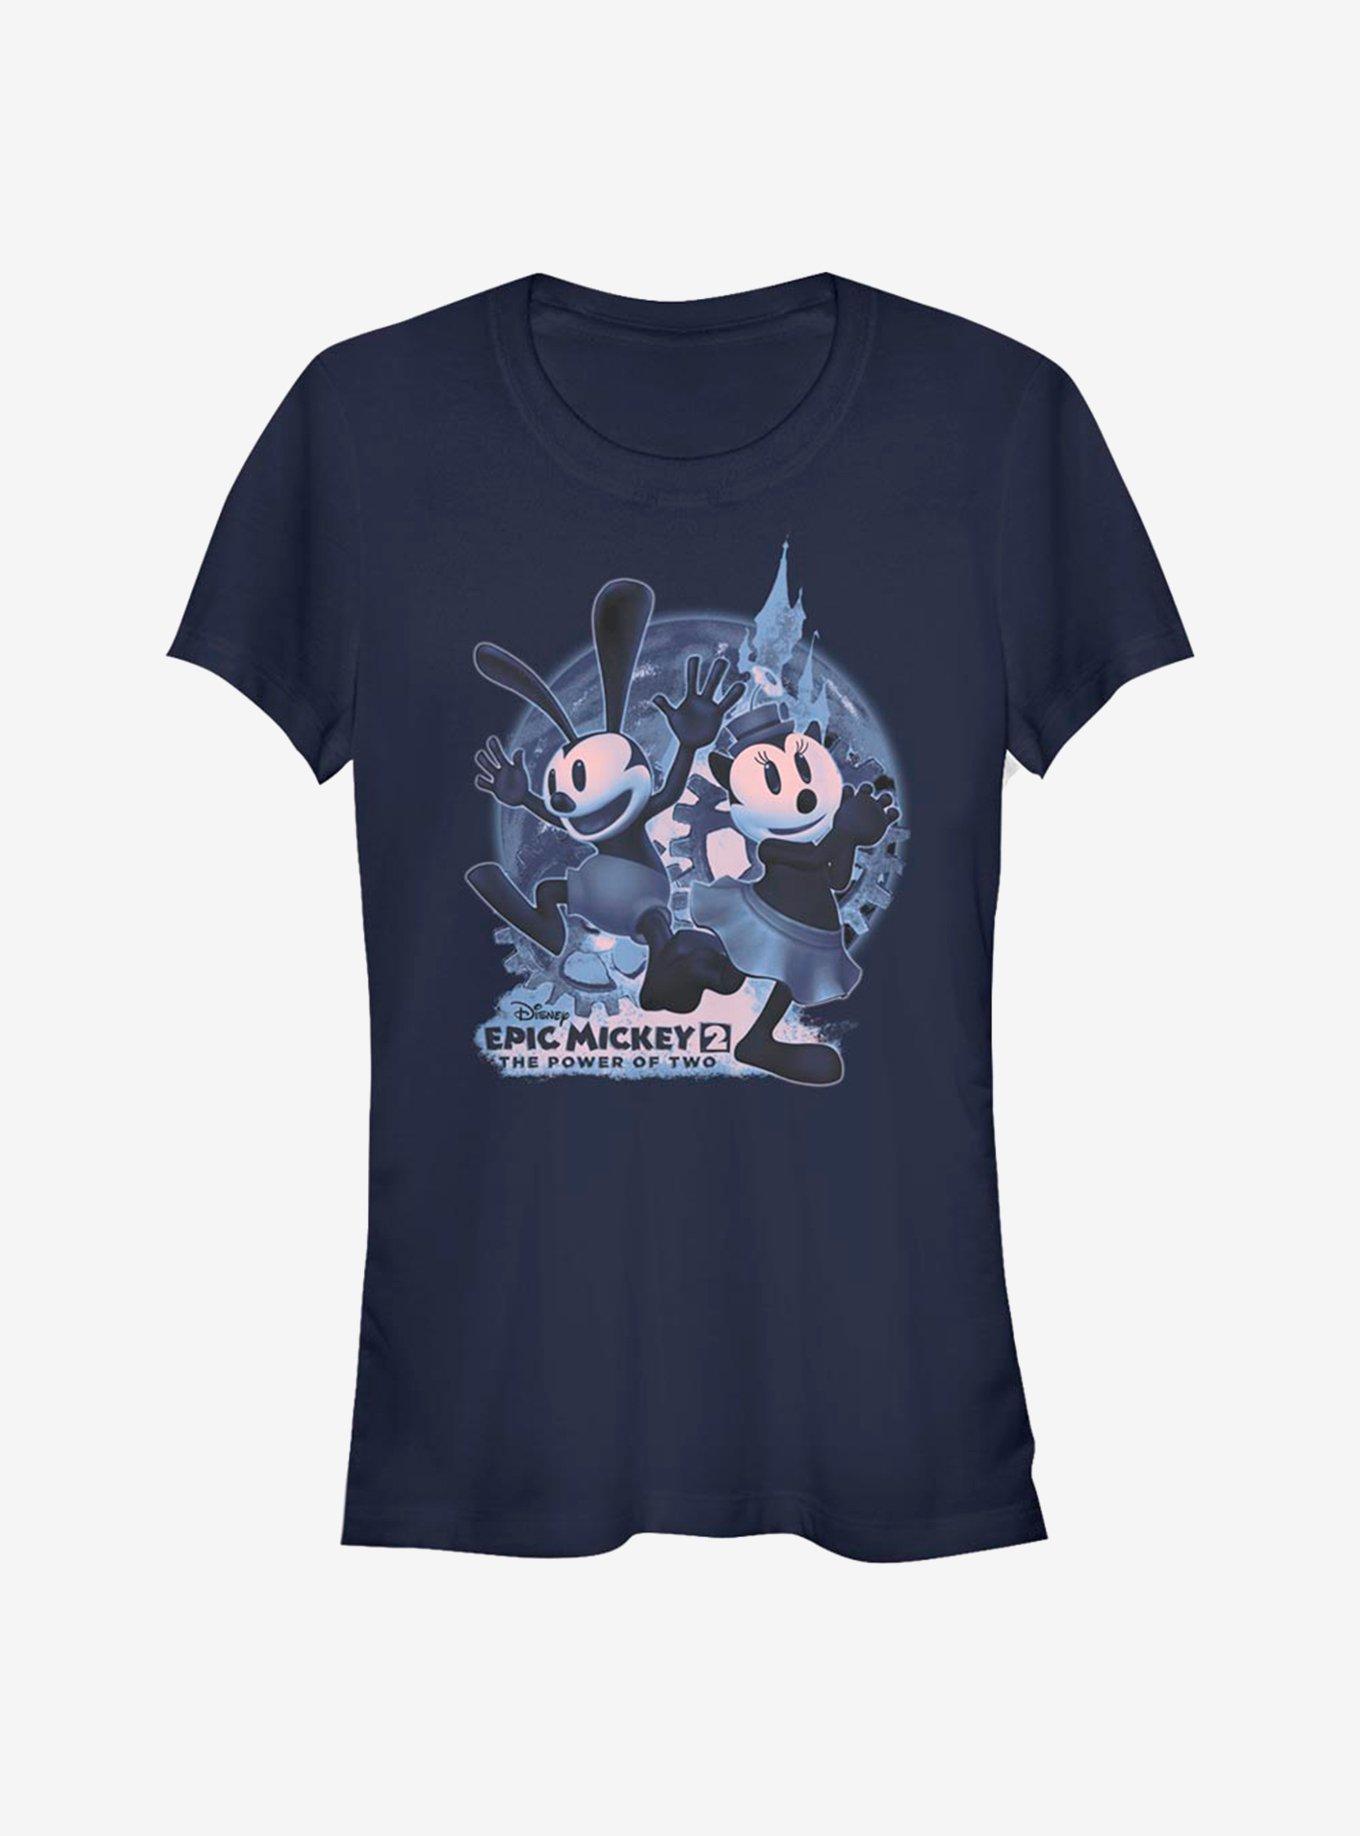 Disney Epic Mickey Oswald And Ortensia Moon Girls T-Shirt, NAVY, hi-res